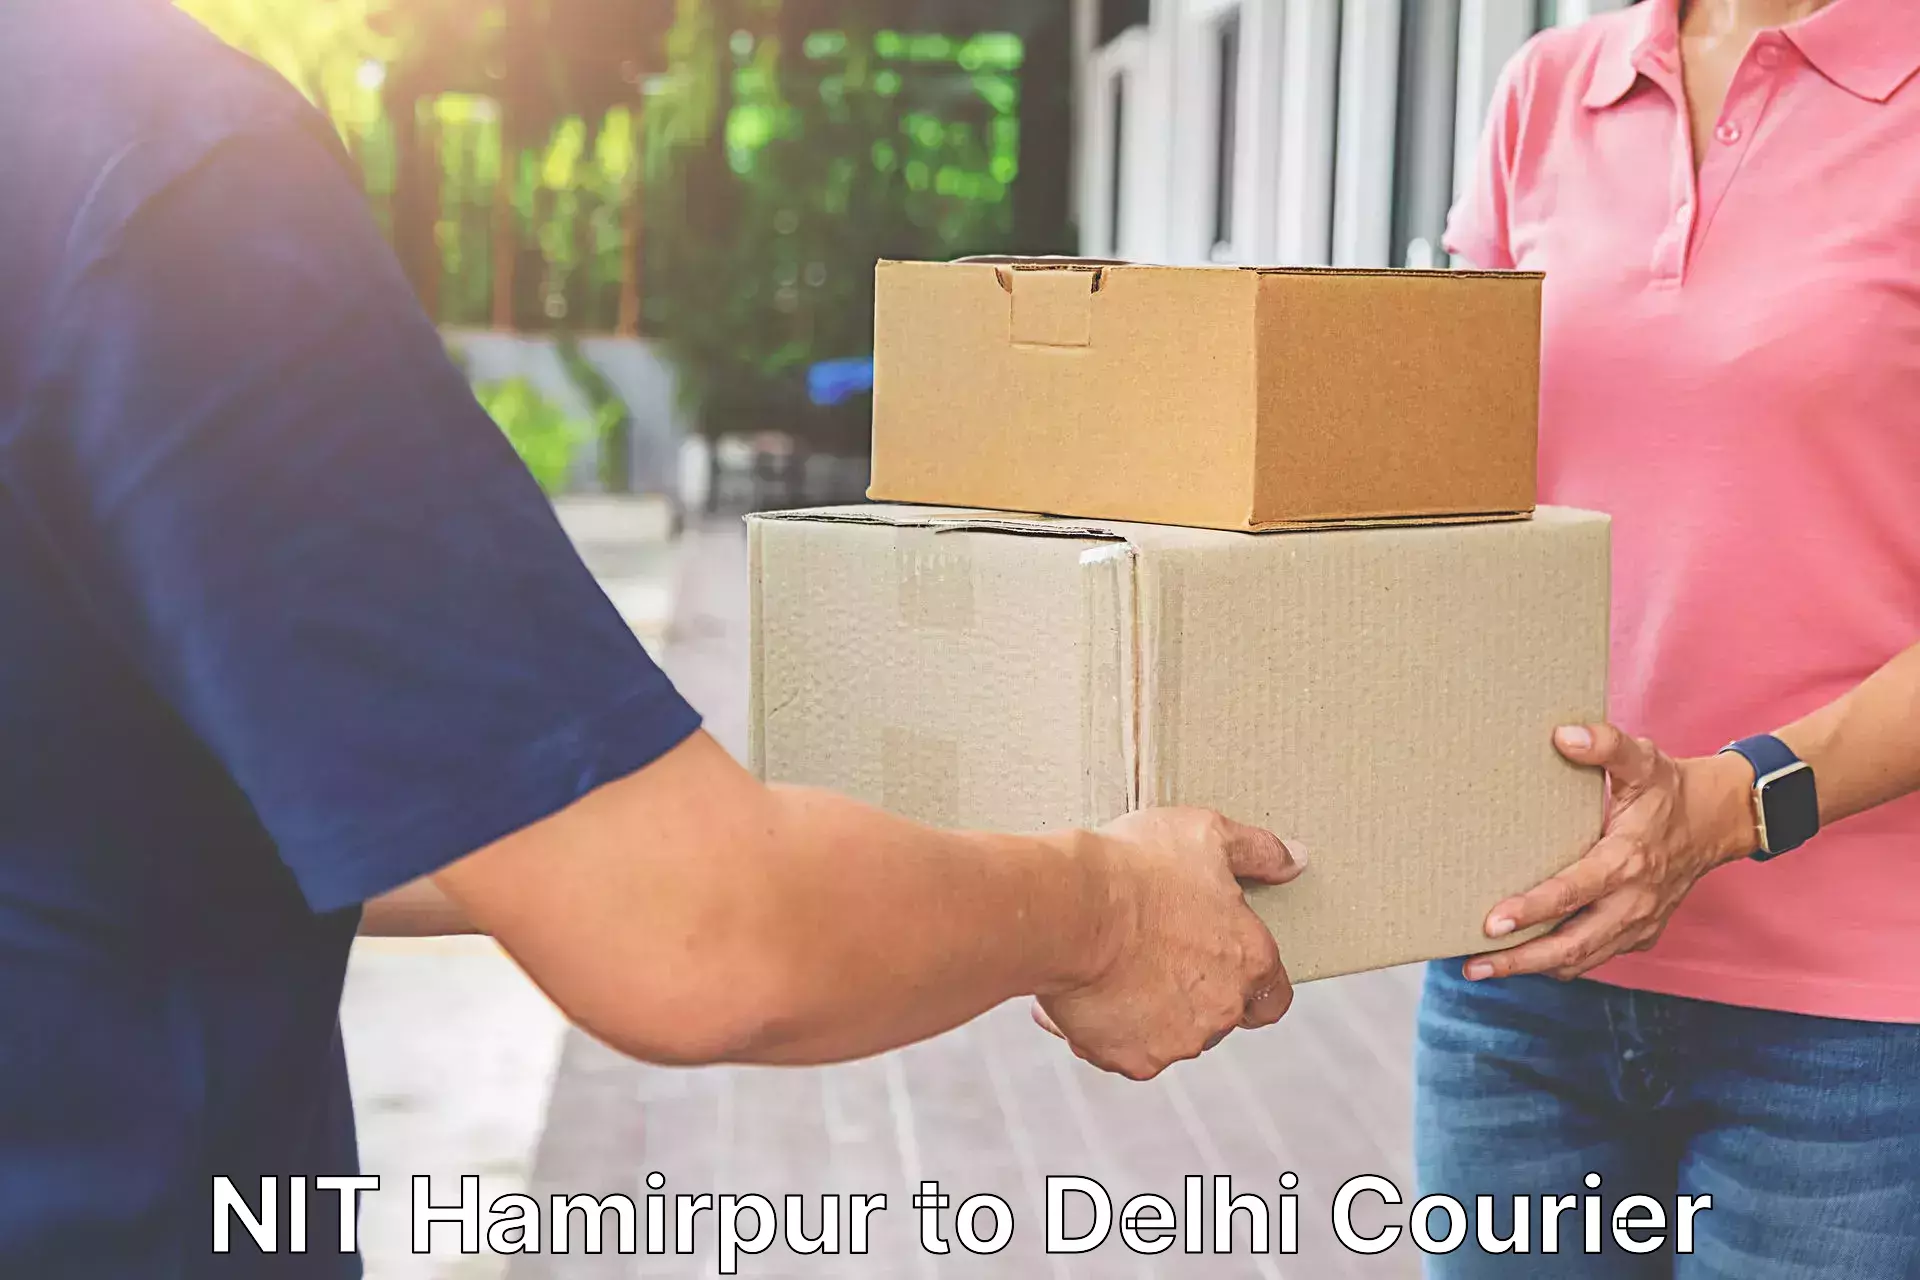 On-call courier service NIT Hamirpur to Burari